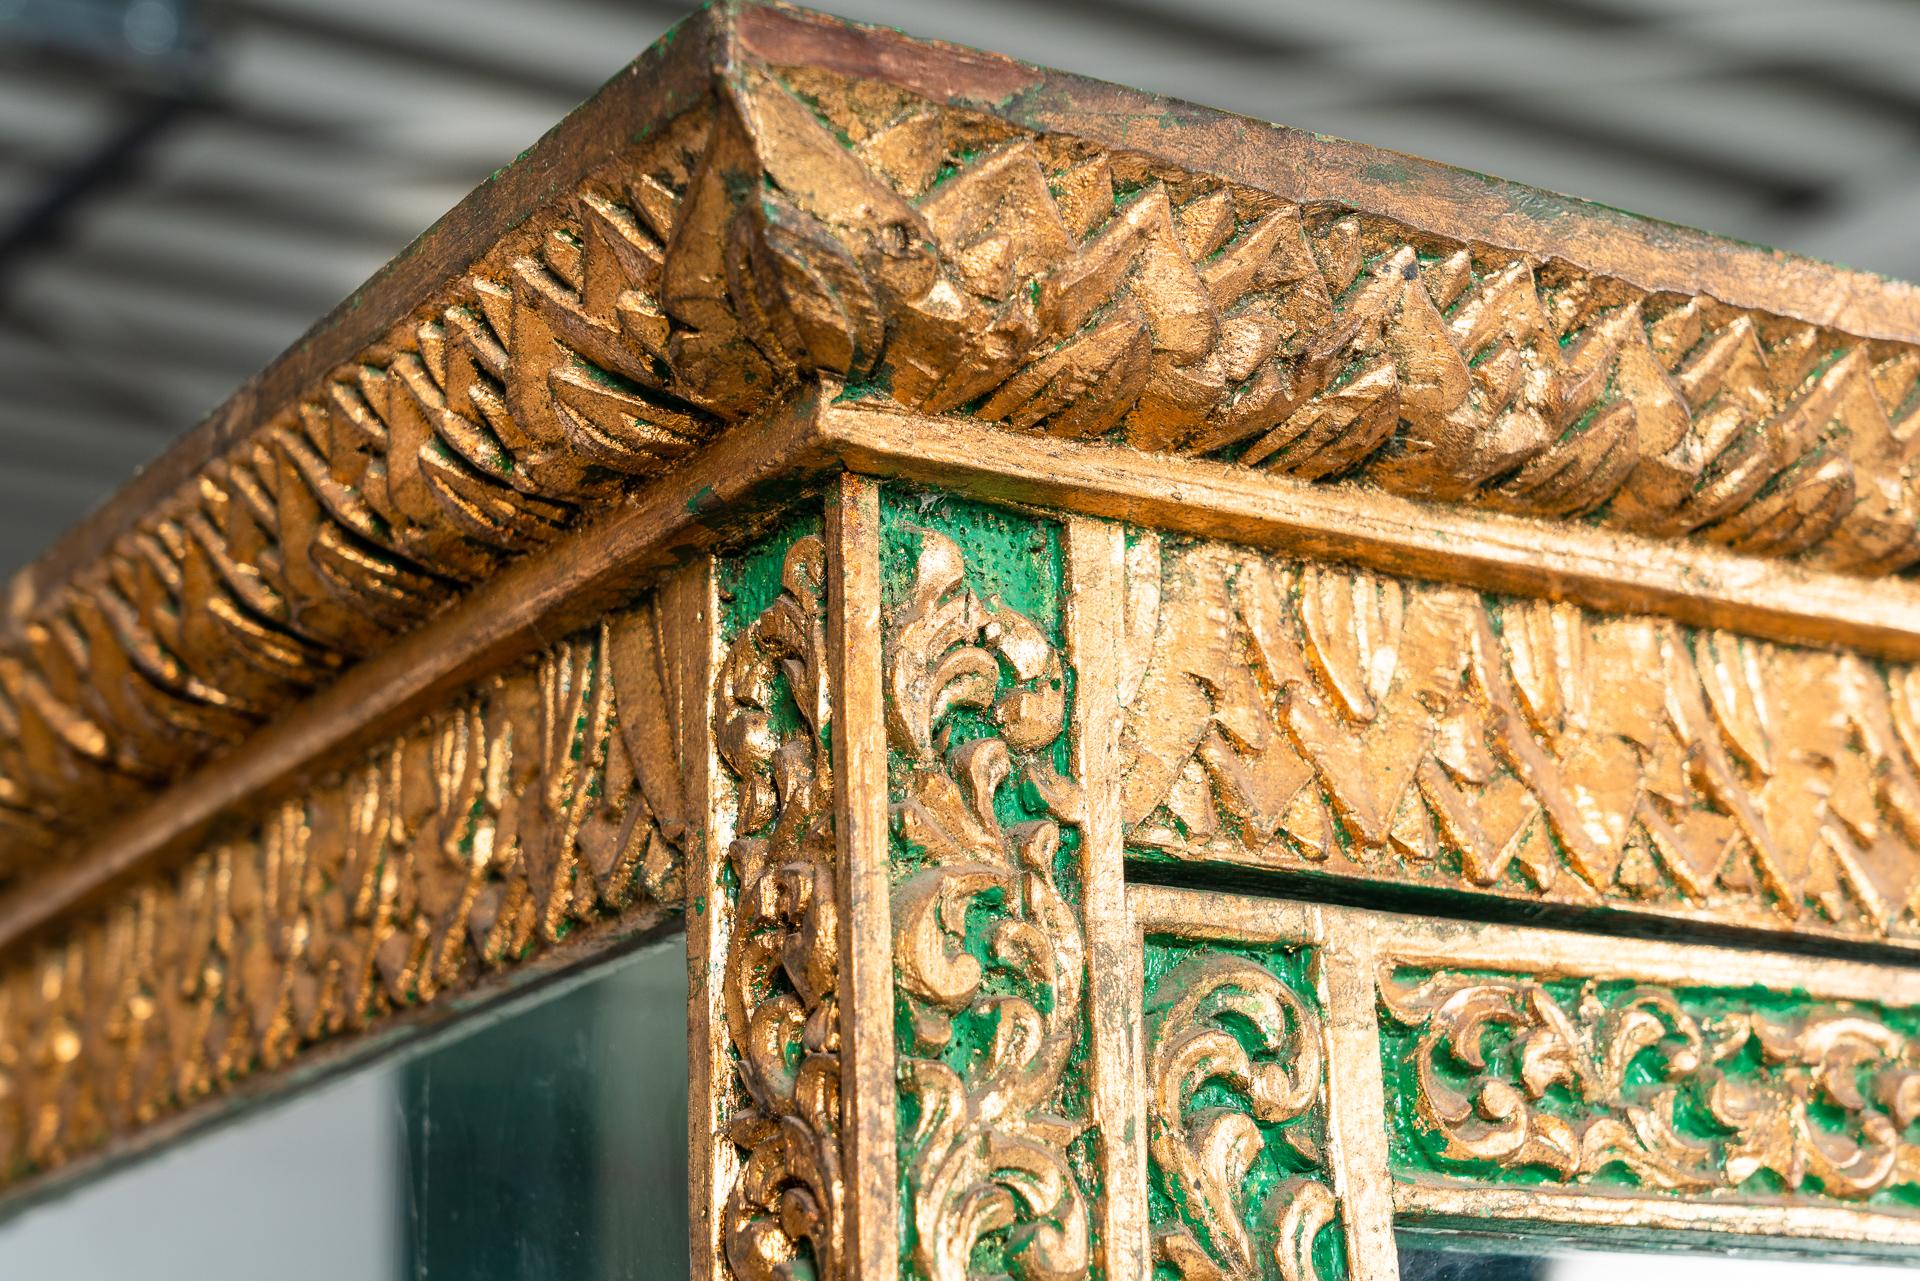 These 2 beautiful glas cabinet from Thailand and are made from hand carved teakwood and have a base of antique green paint with golden details.
Definitely a rare pair of antique cabinets which have their uniqueness in the detailed carved